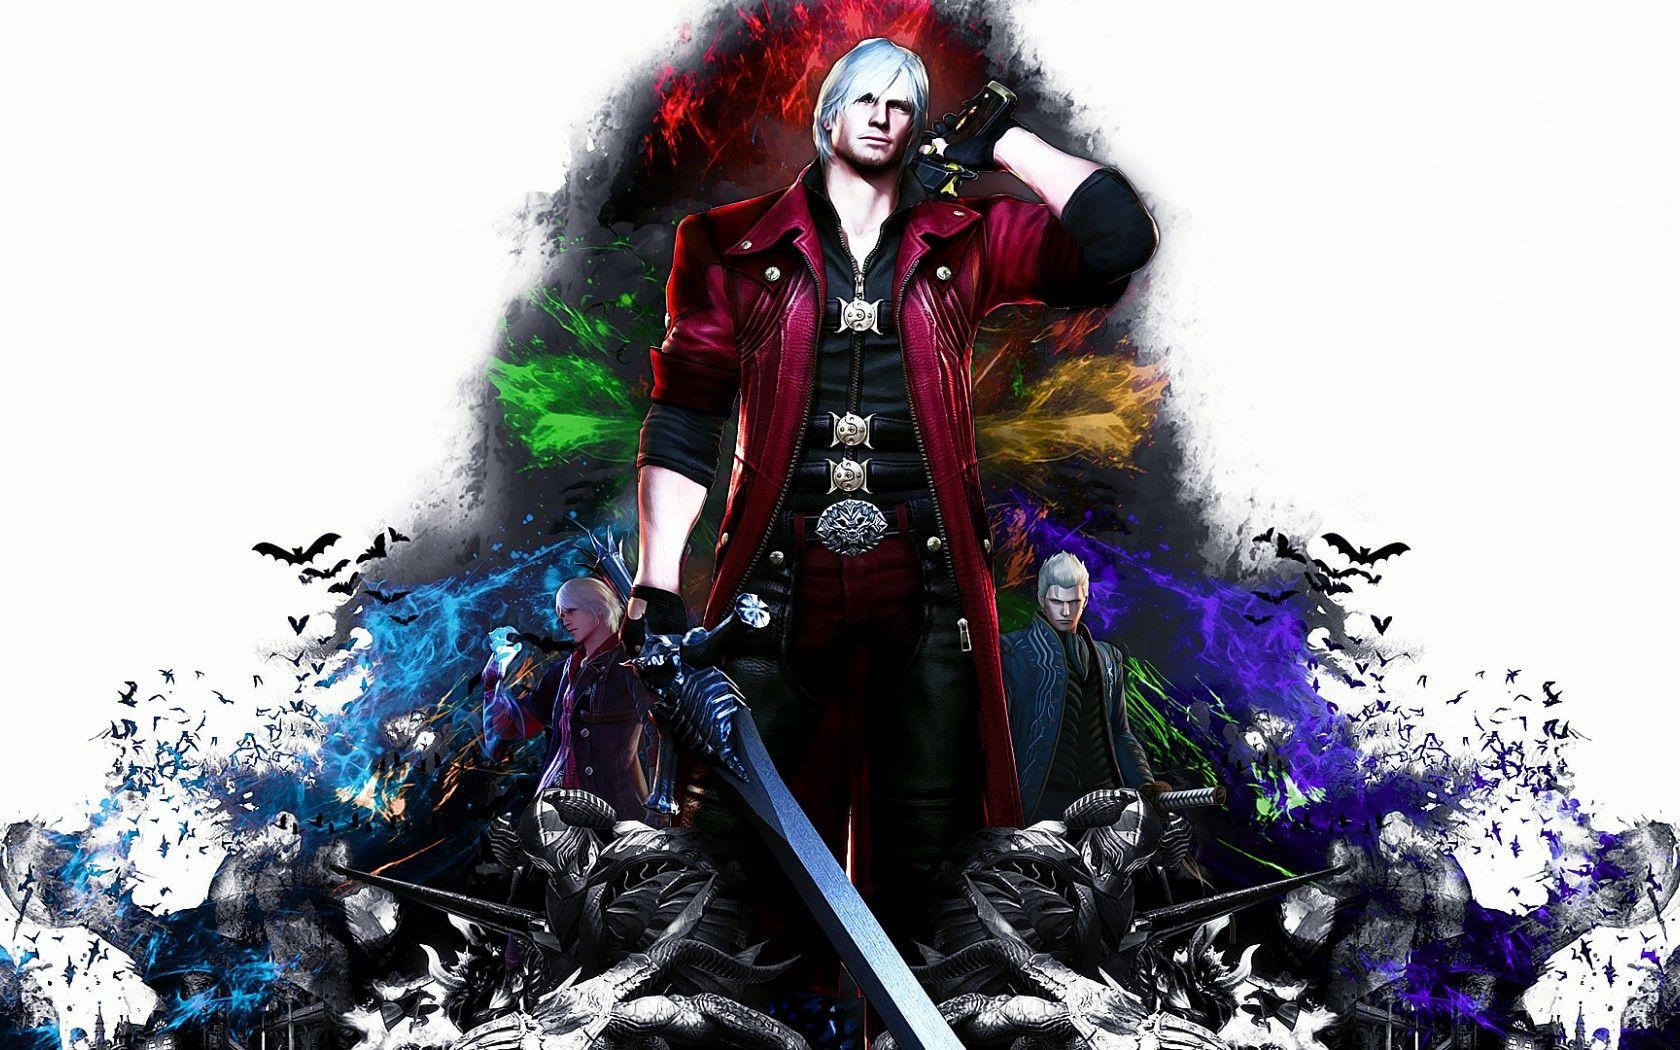 Download wallpaper 1680x1050 devil may cry special edition, dante